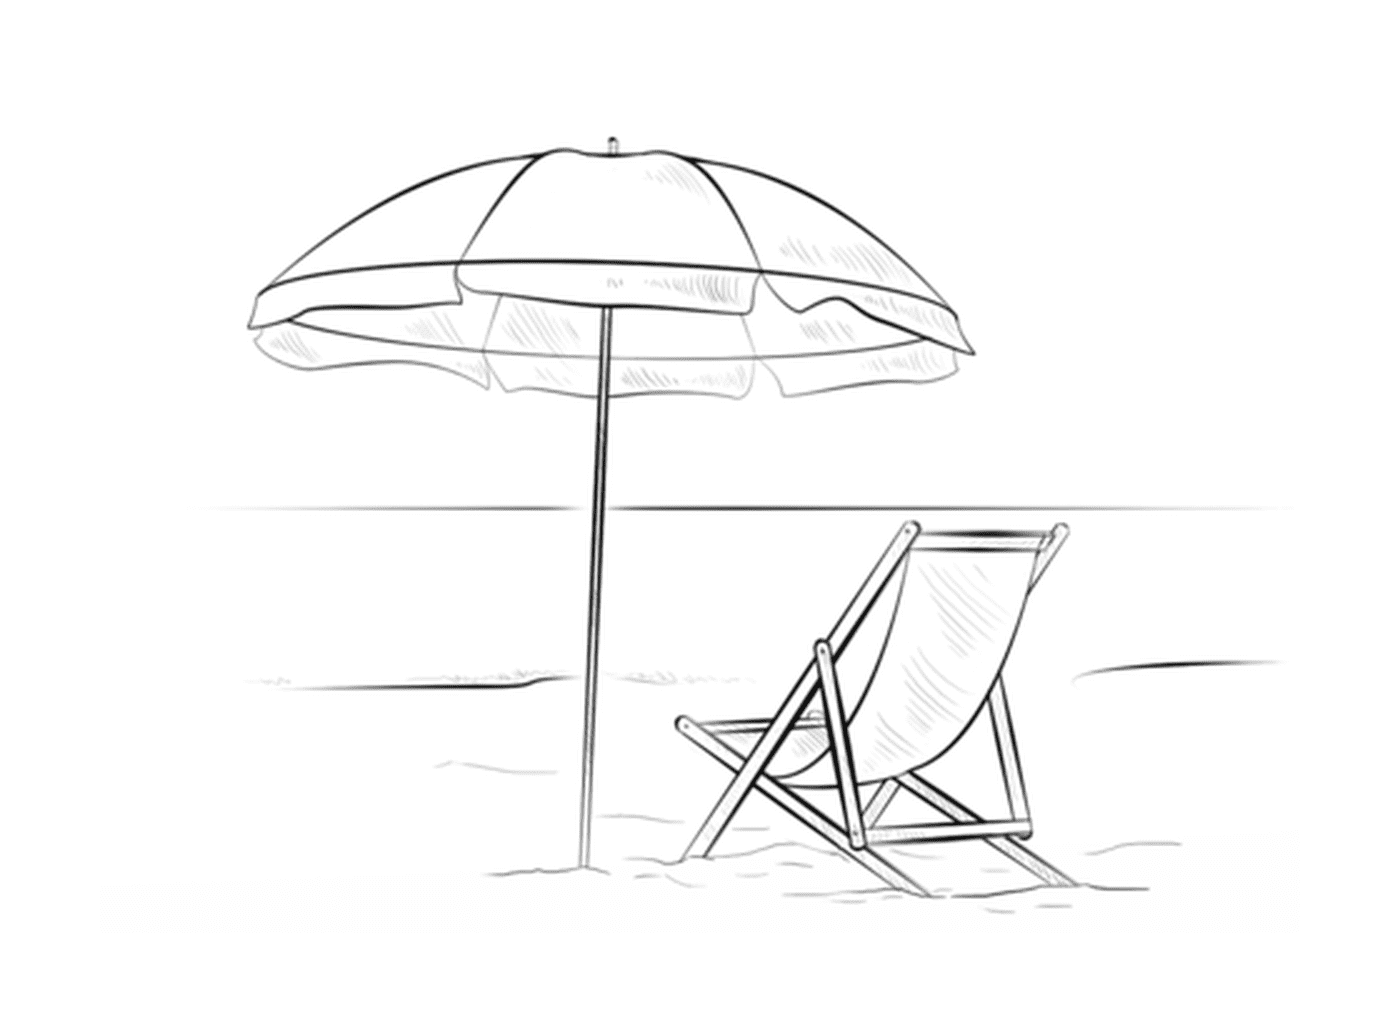  A parasol with a beach chair during the summer holidays 